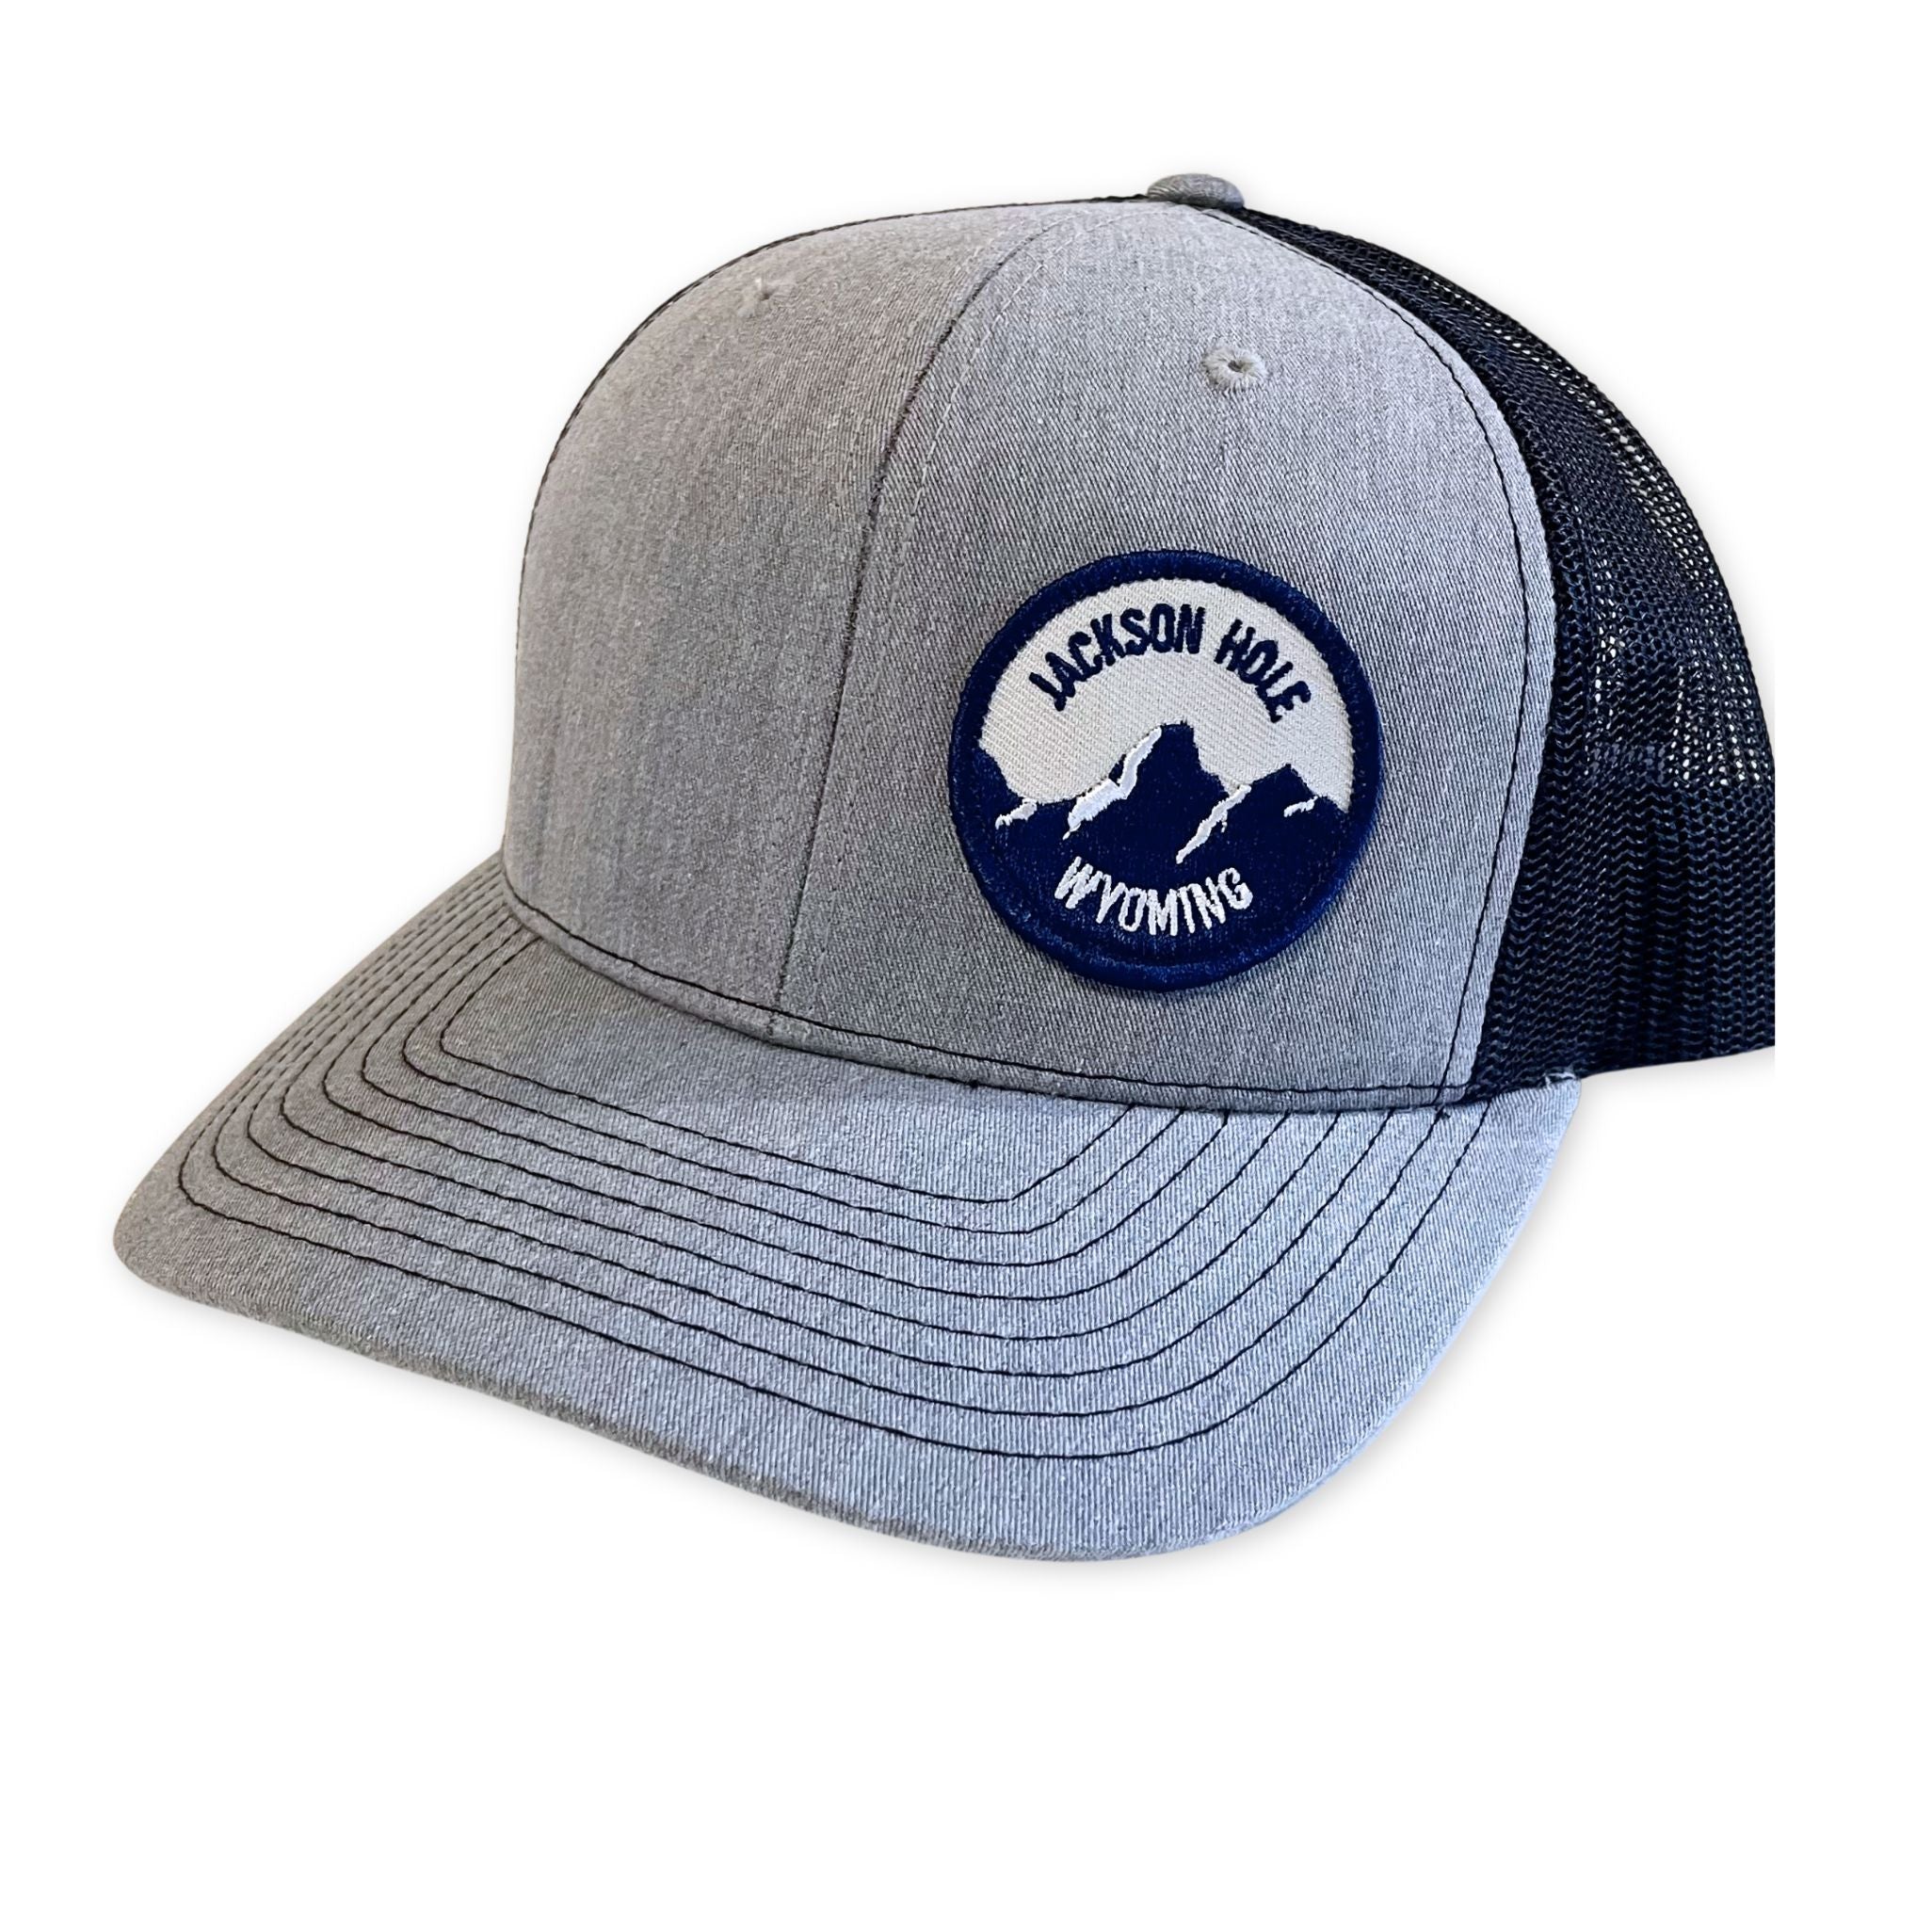 Heather Gray and Navy Jackson Hole Wyoming Circular Patch Trucker